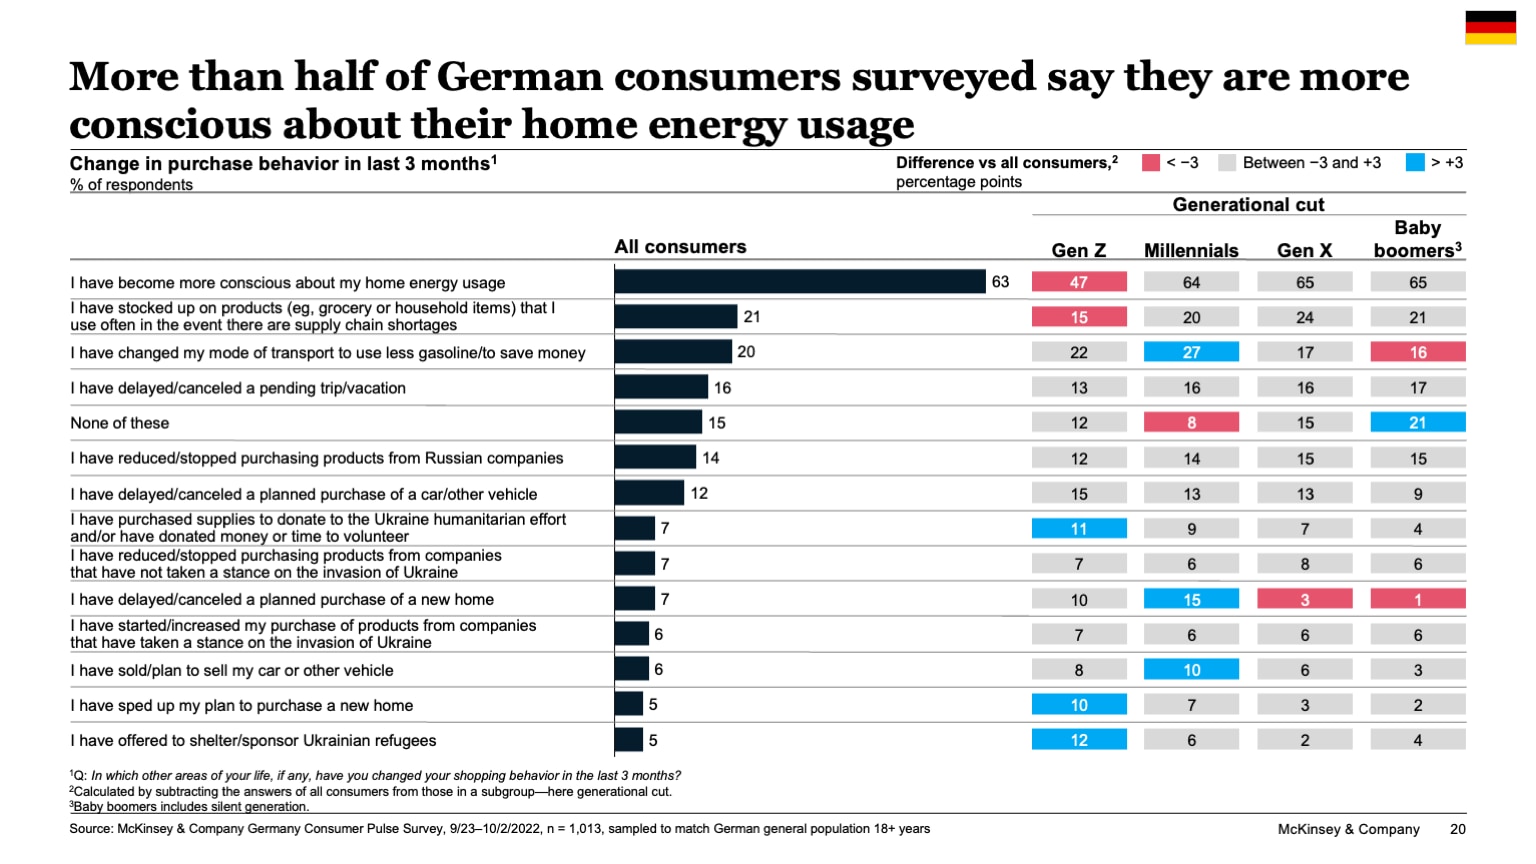 More than half of German consumers surveyed say they are more conscious about their home energy usage